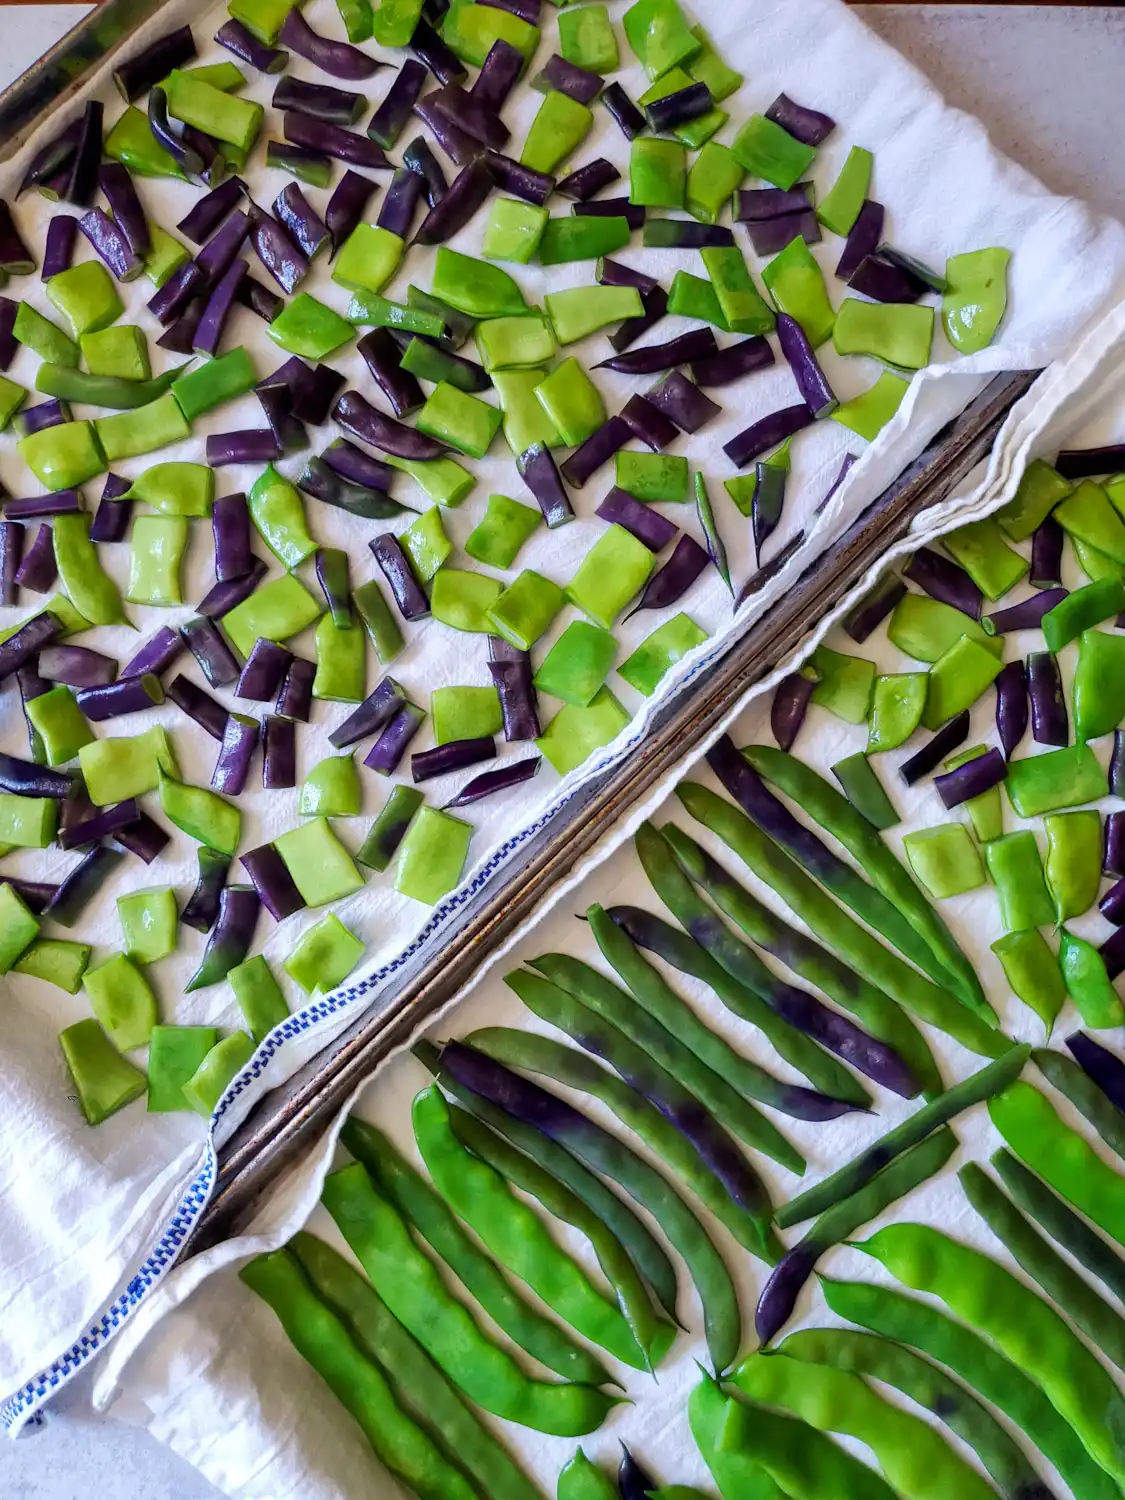 Purple and green veggies lay out on towels to air dry, some have been cut into pieces while others have been left whole. 